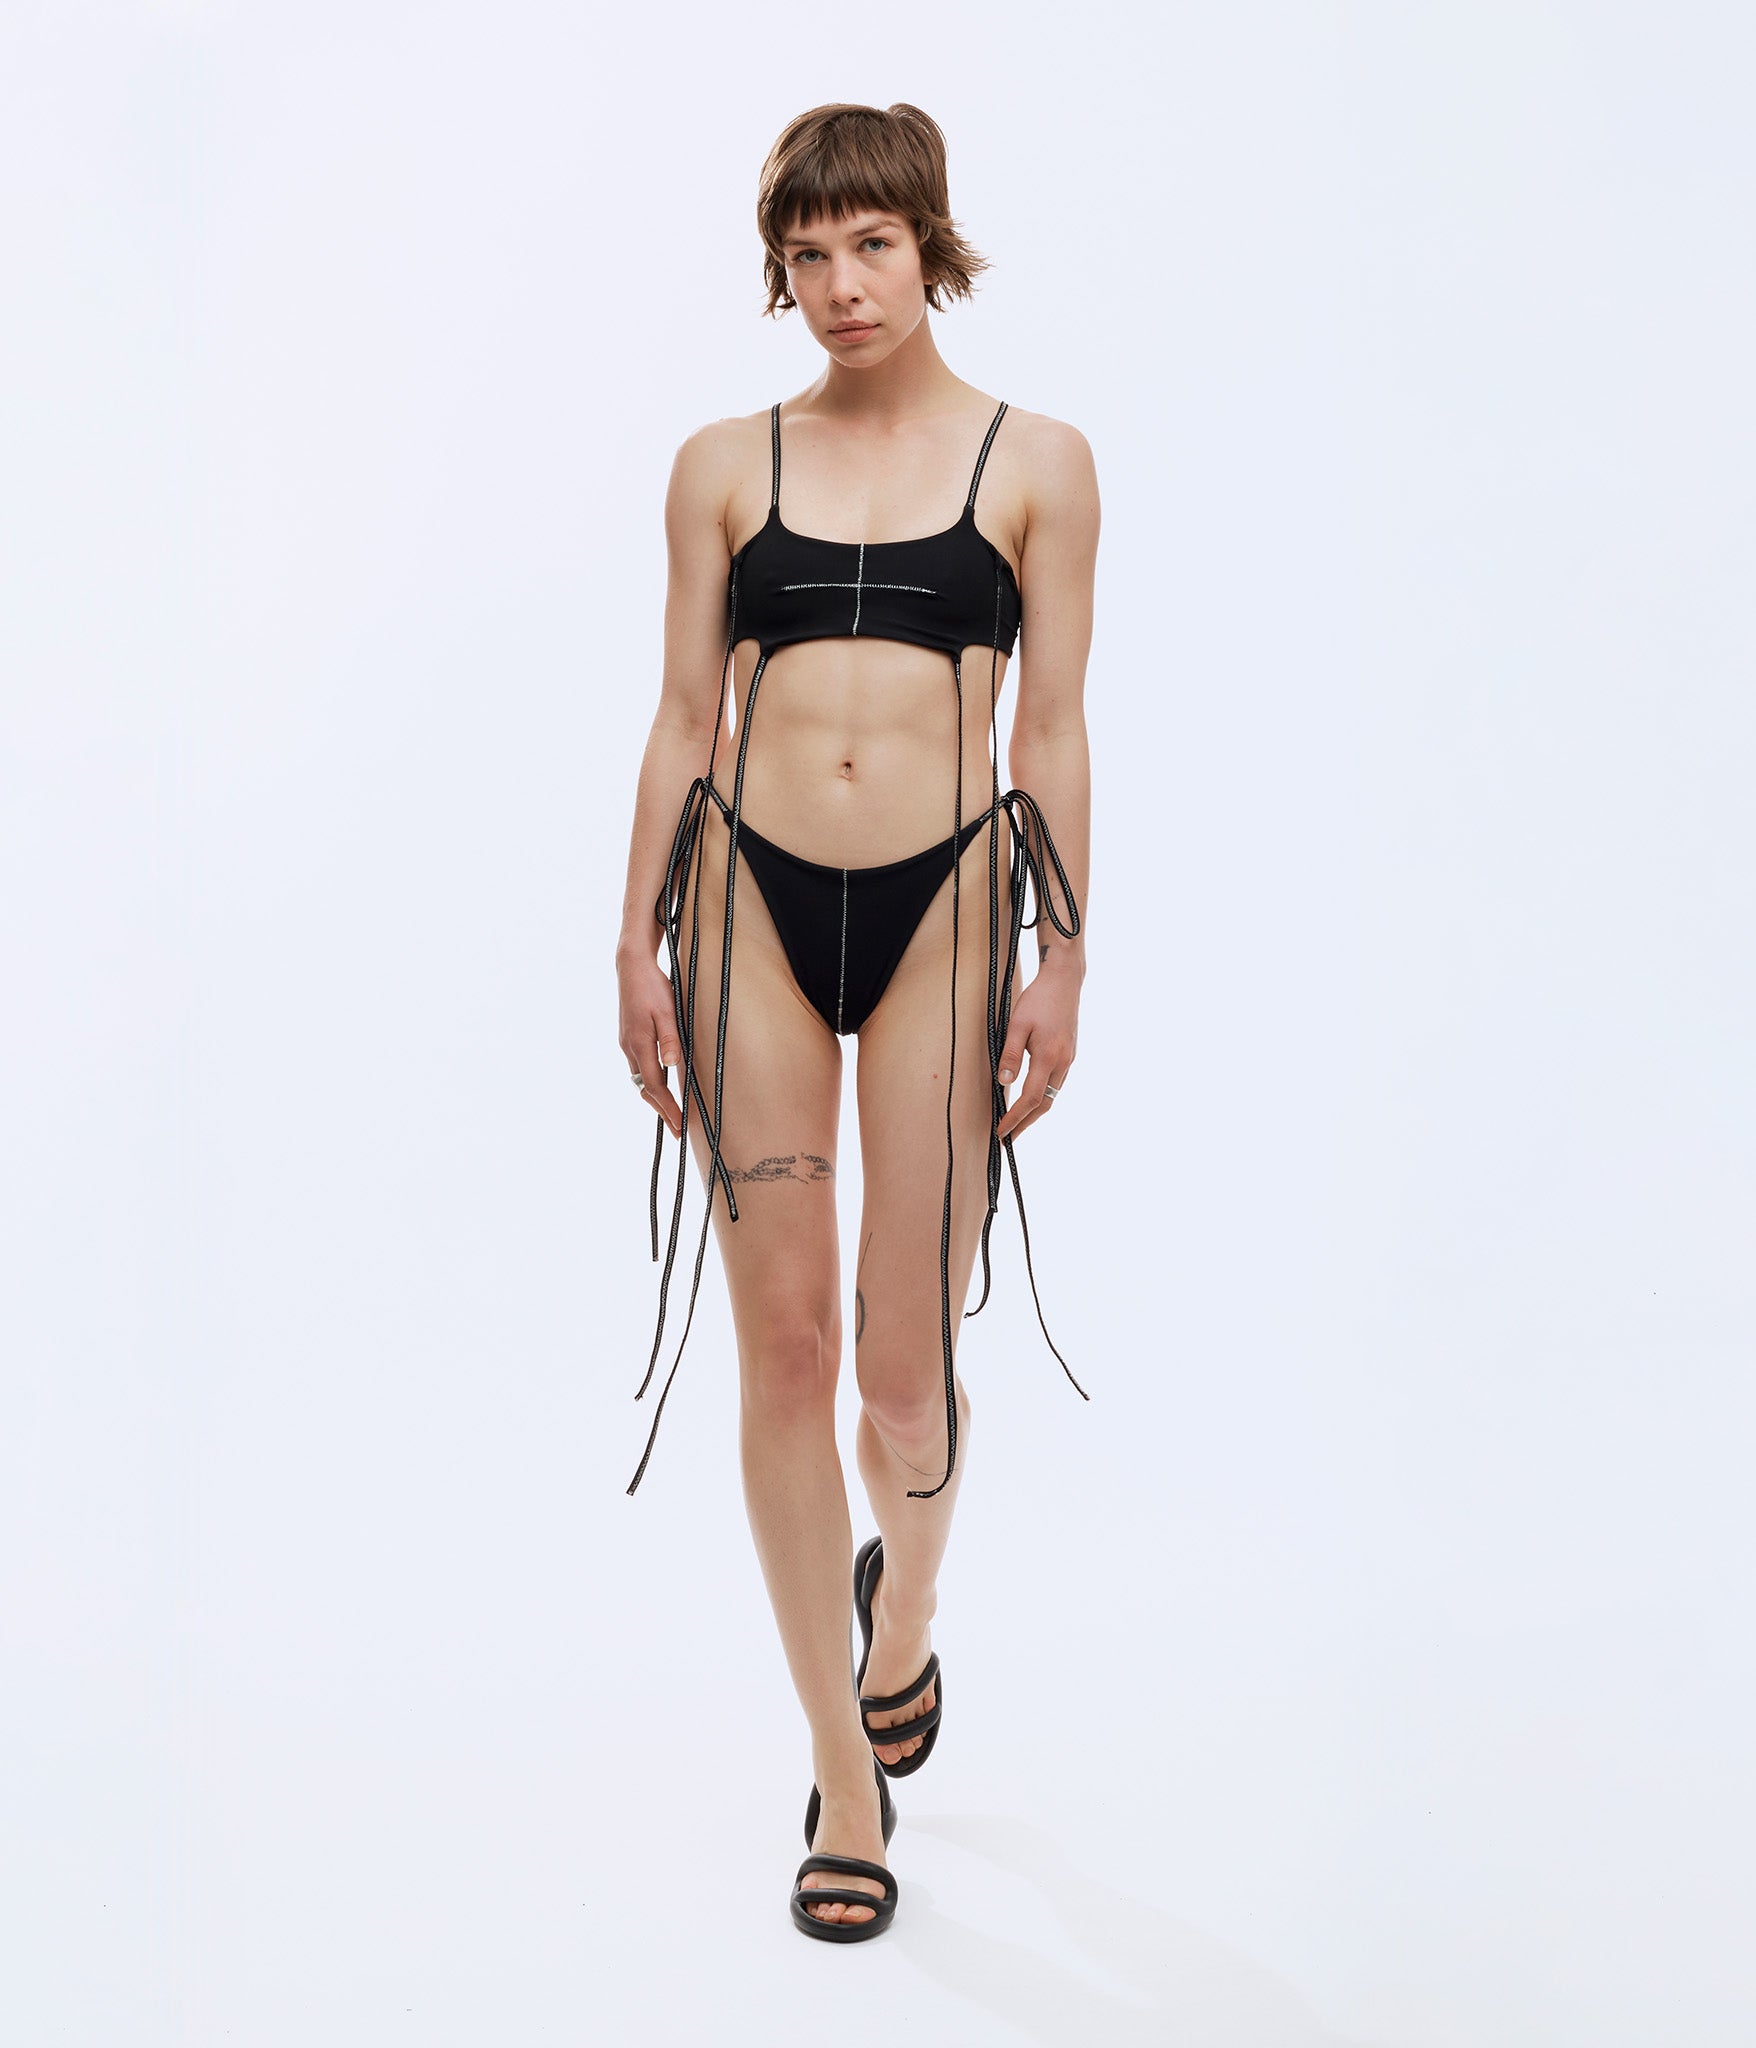 Black bikini top with white contrast stitching. Made by Australian independent designer, BRB, and sold in Melbourne clothing boutique called Error404store.